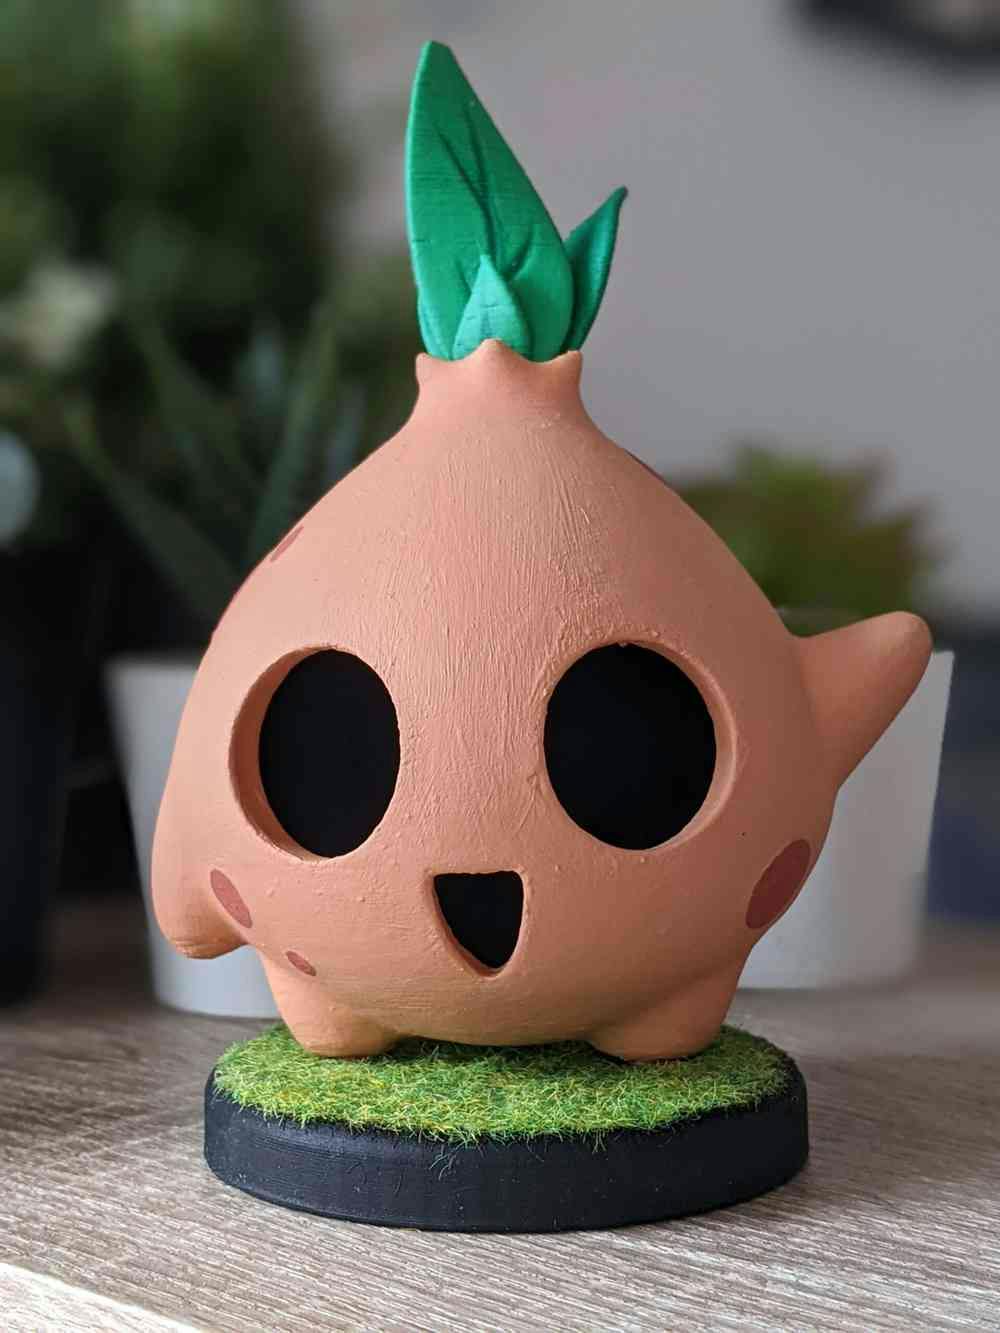 A photograph of a terracotta clay character that has a large rounded face with a smiling expression, there is a green plant emerging from the top of their head. The character is waving and standing on a round grass step.